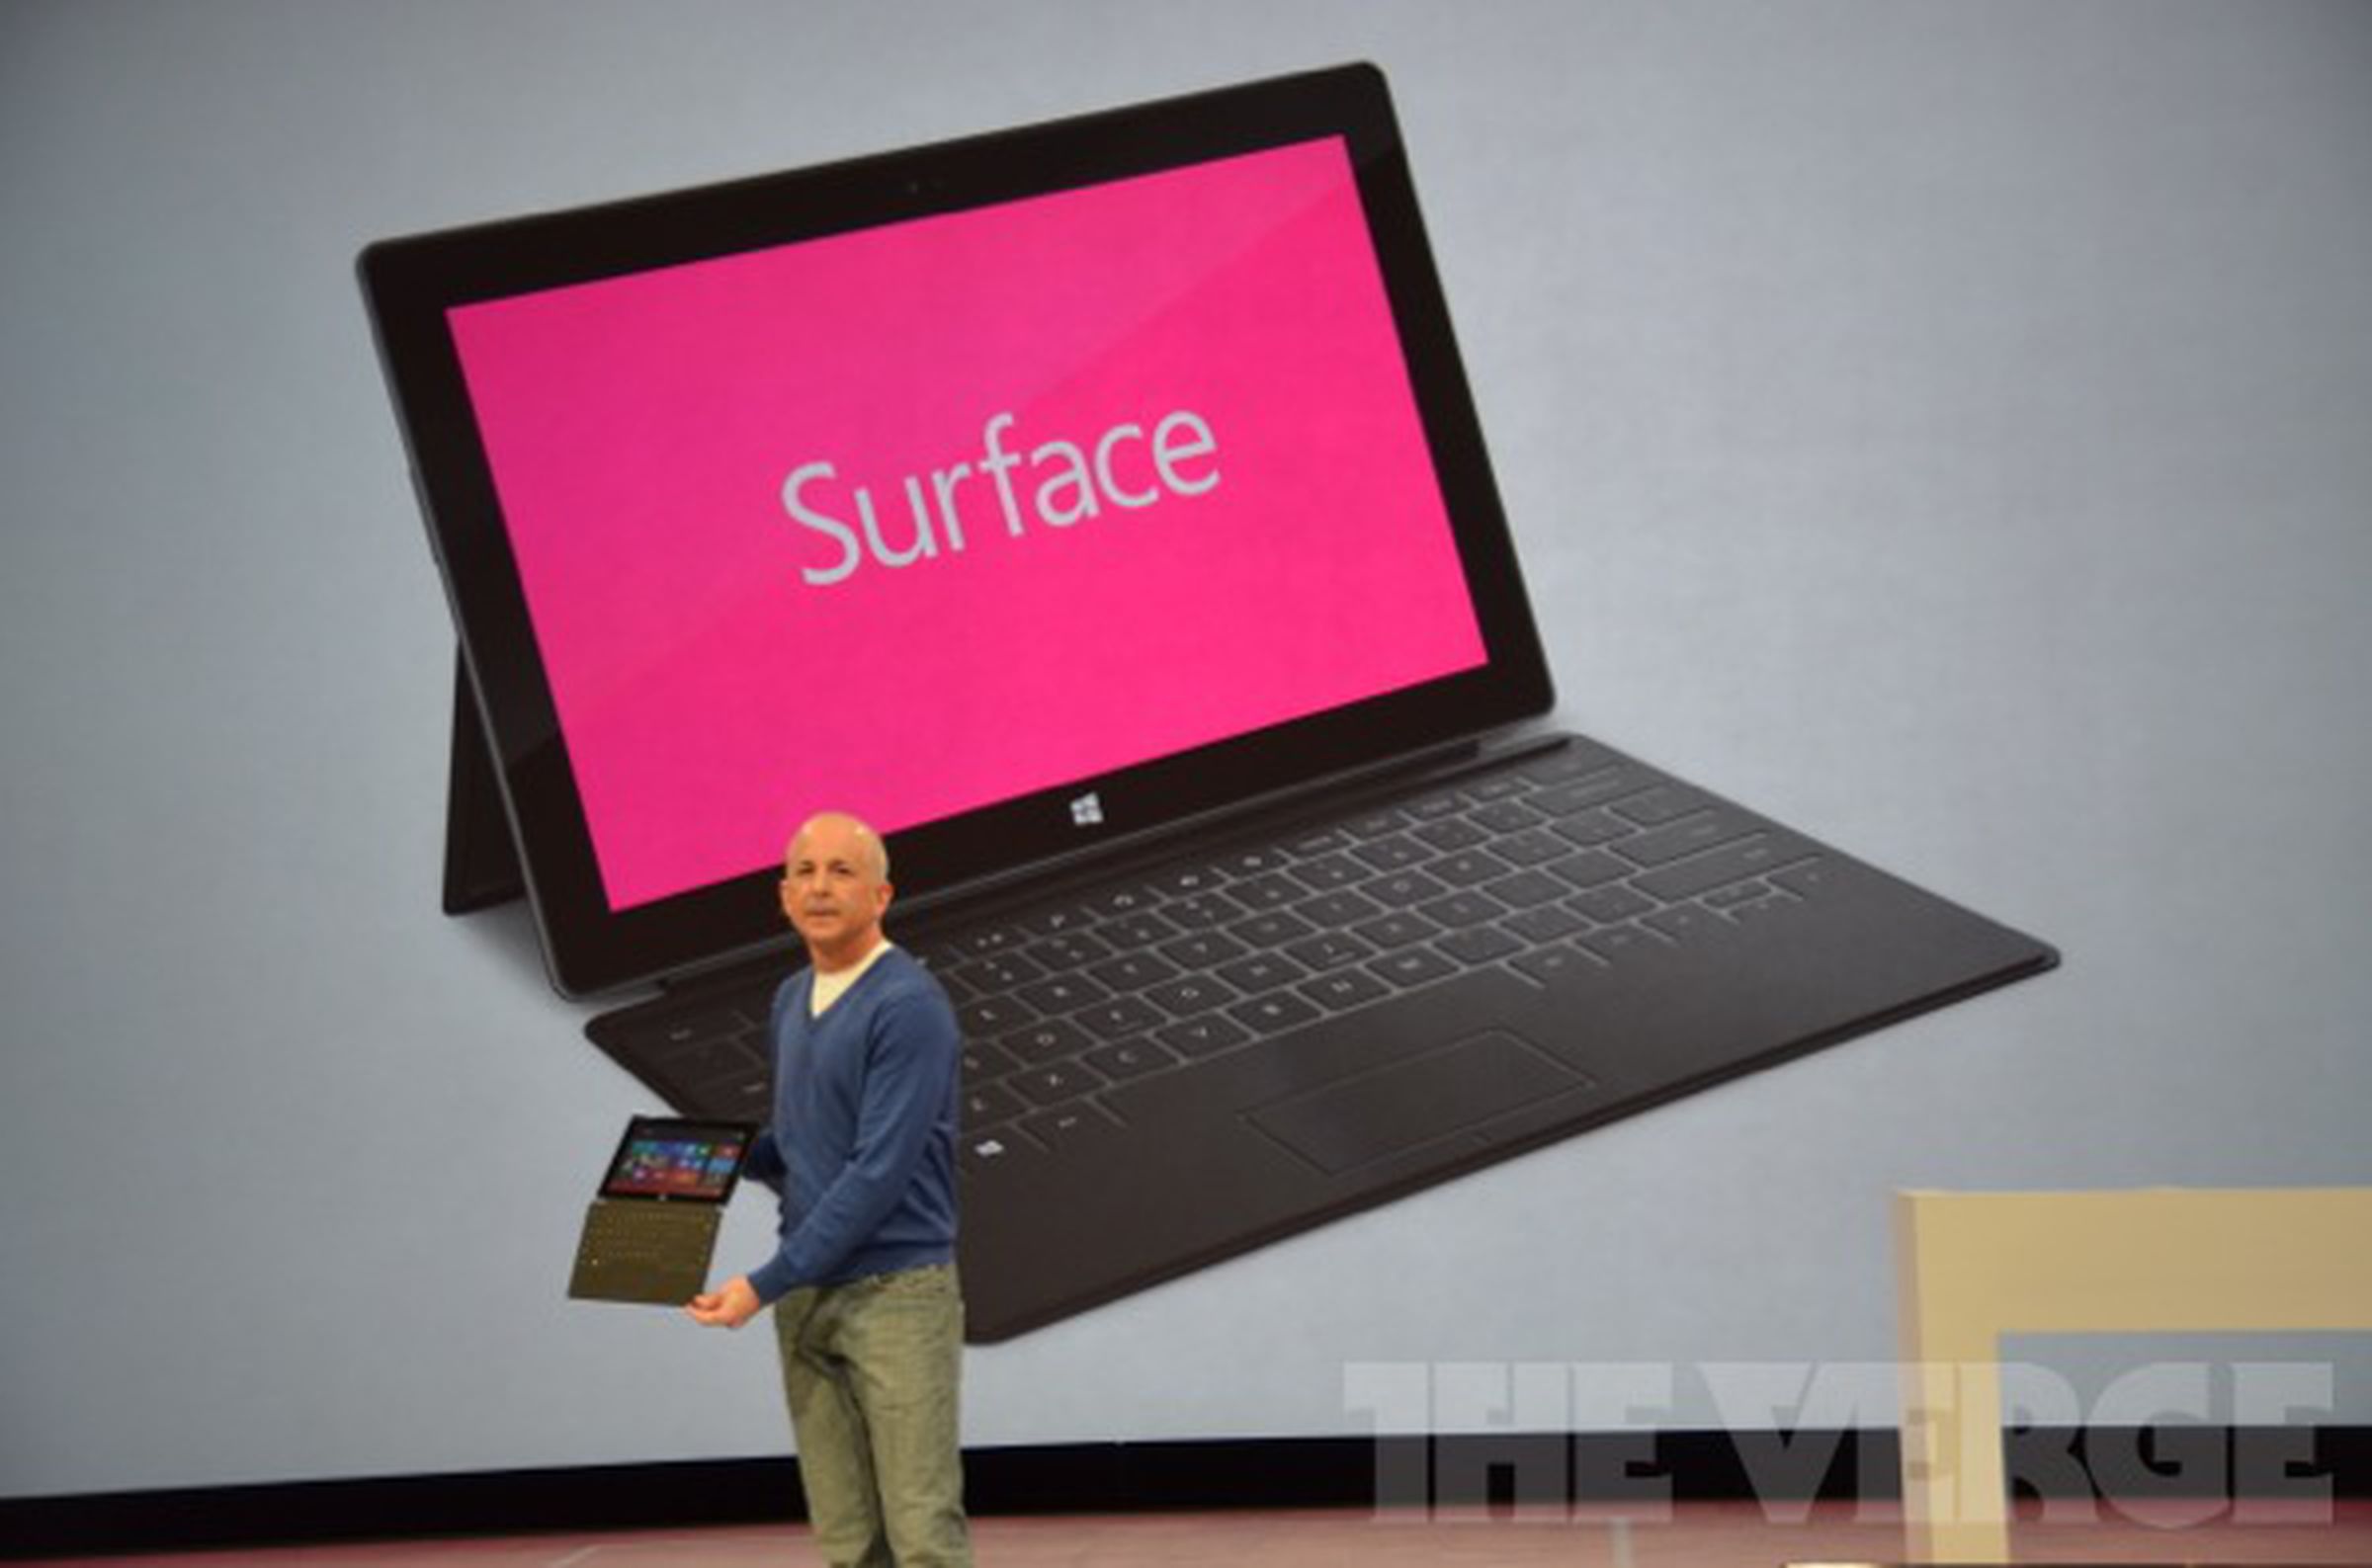 Microsoft Surface Touch Cover keyboard live blog photos